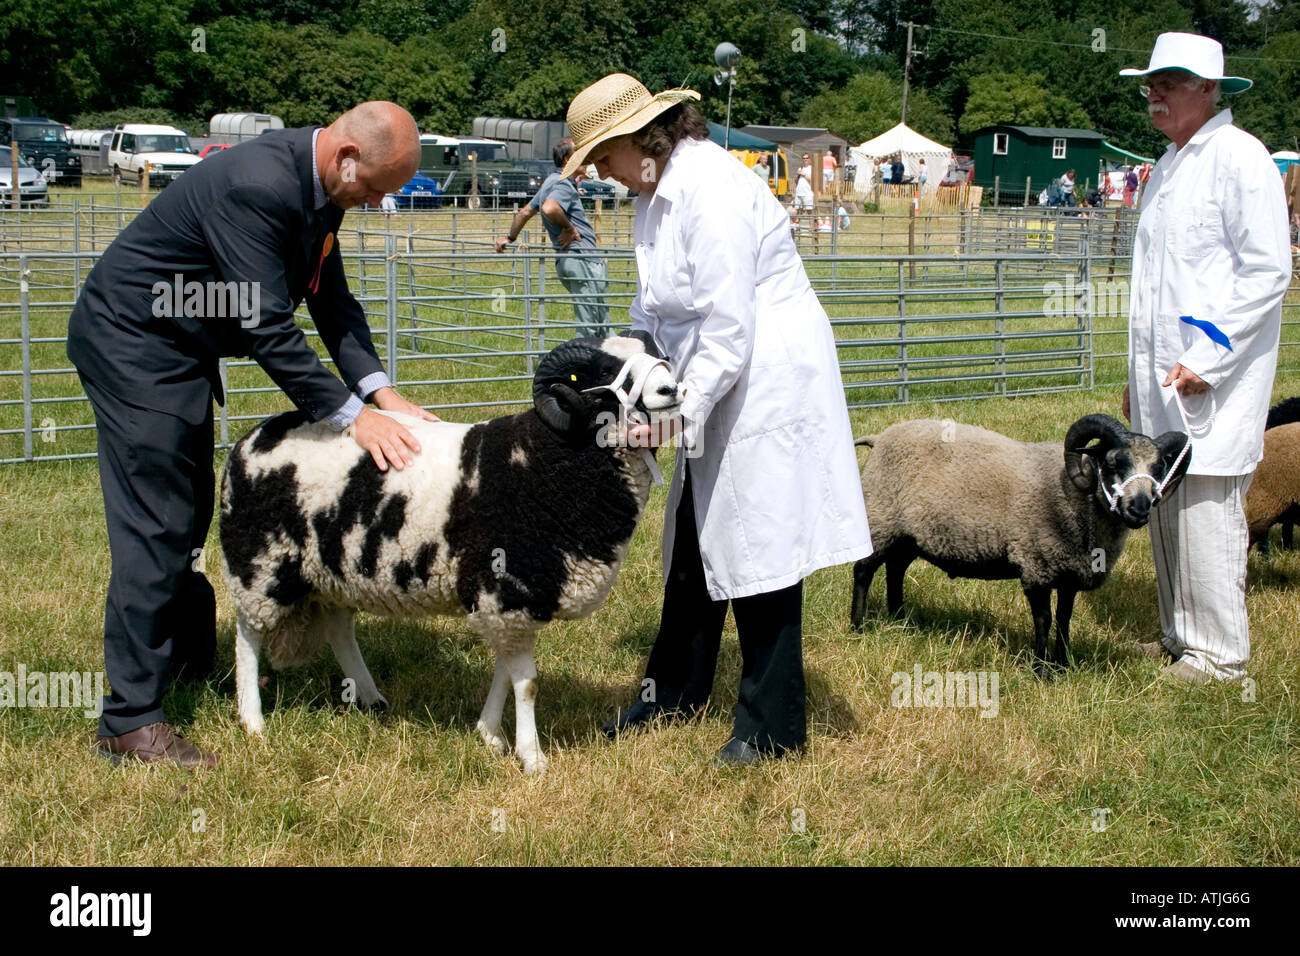 sheep being judged examined by official at Rare Breeds Show Weald Downland Open Air Museum Singleton West Sussex Stock Photo